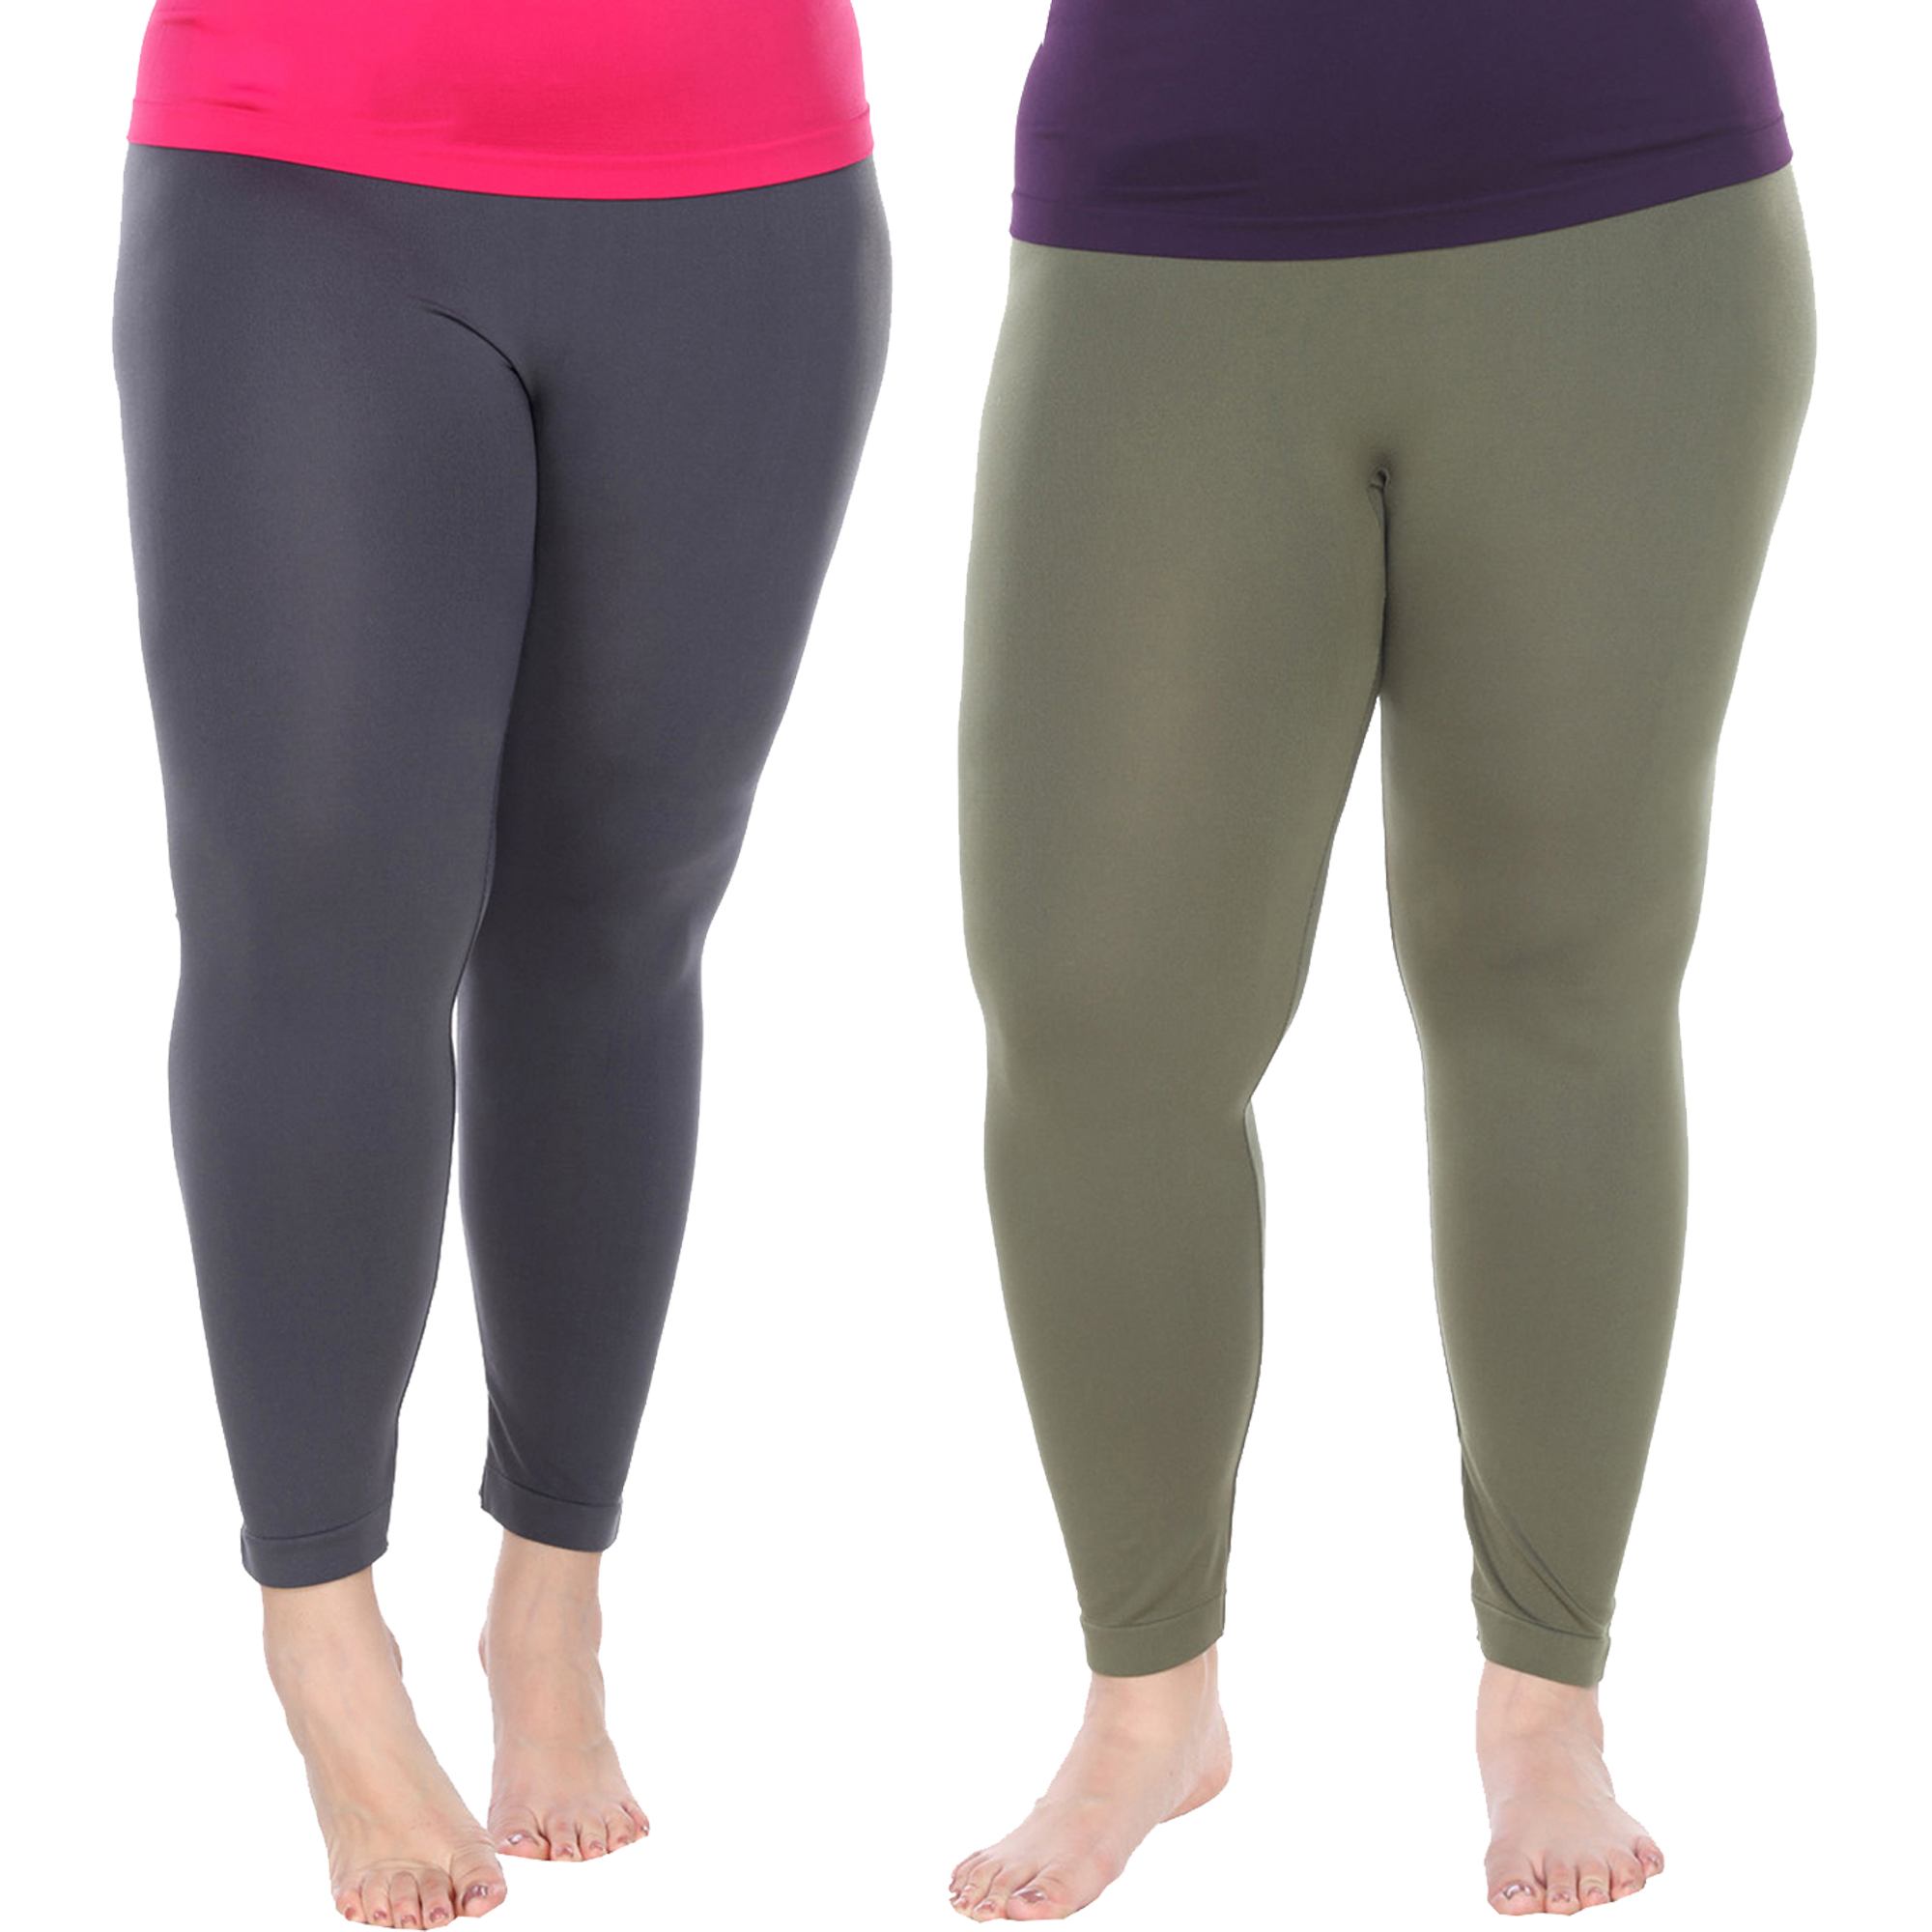 White Mark Women's Pack Of 2 Leggings - Charcoal, Olive, One Size - Plus